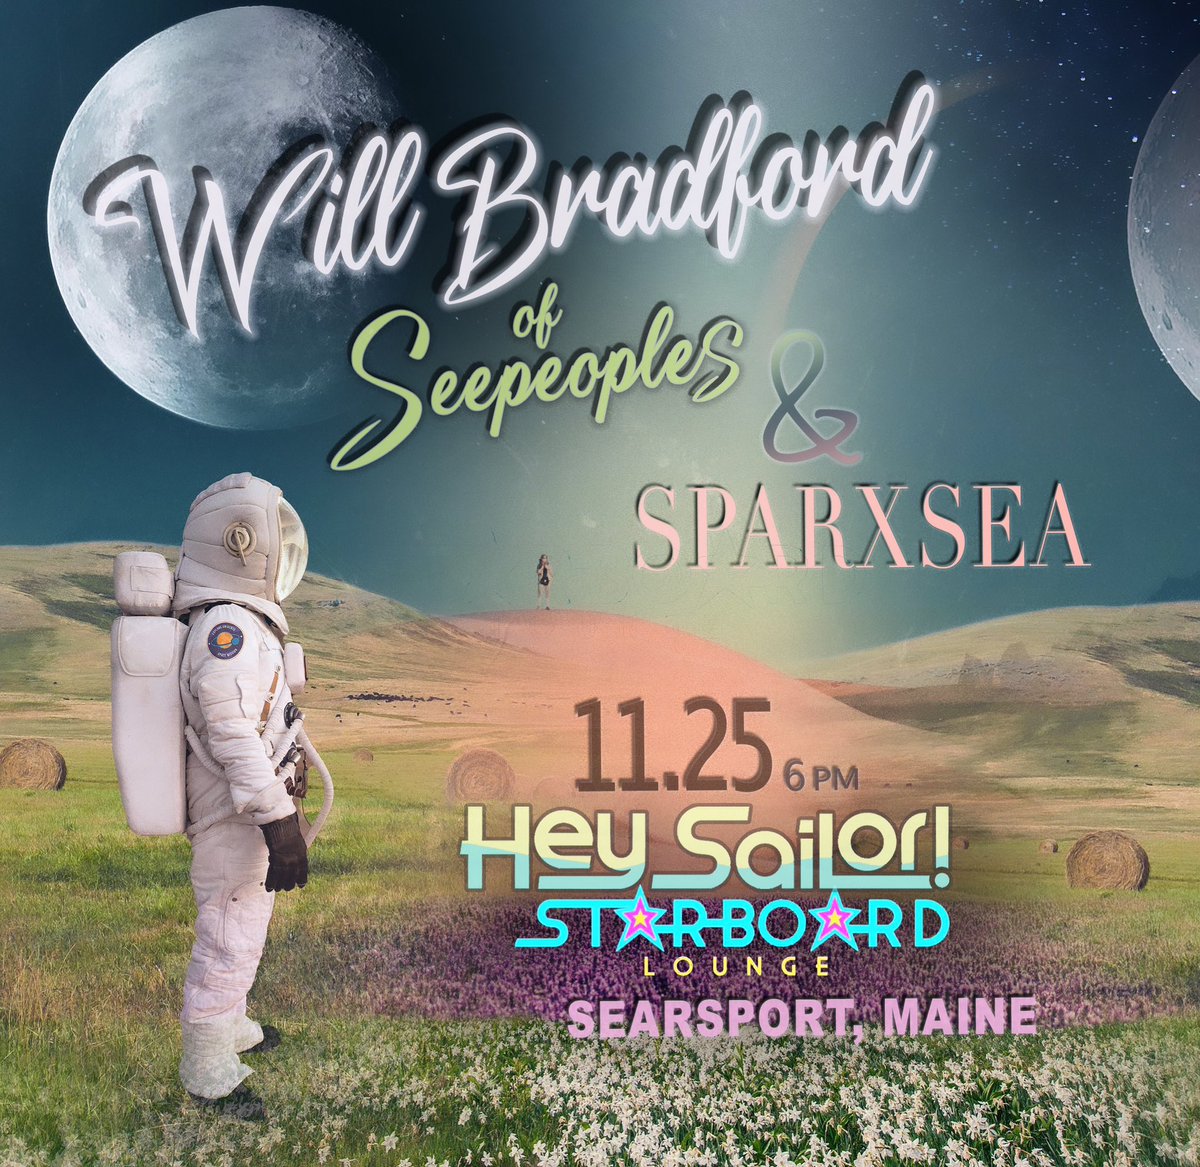 #searsportmaine #midcoastmaine 2NiTE at #starboardlounge #heysailor 11/25 - 6pm. 🖤🙏🏽🪖 with @sparxsea - dj set by @justmilkmusic at 9 - SP on 🔥